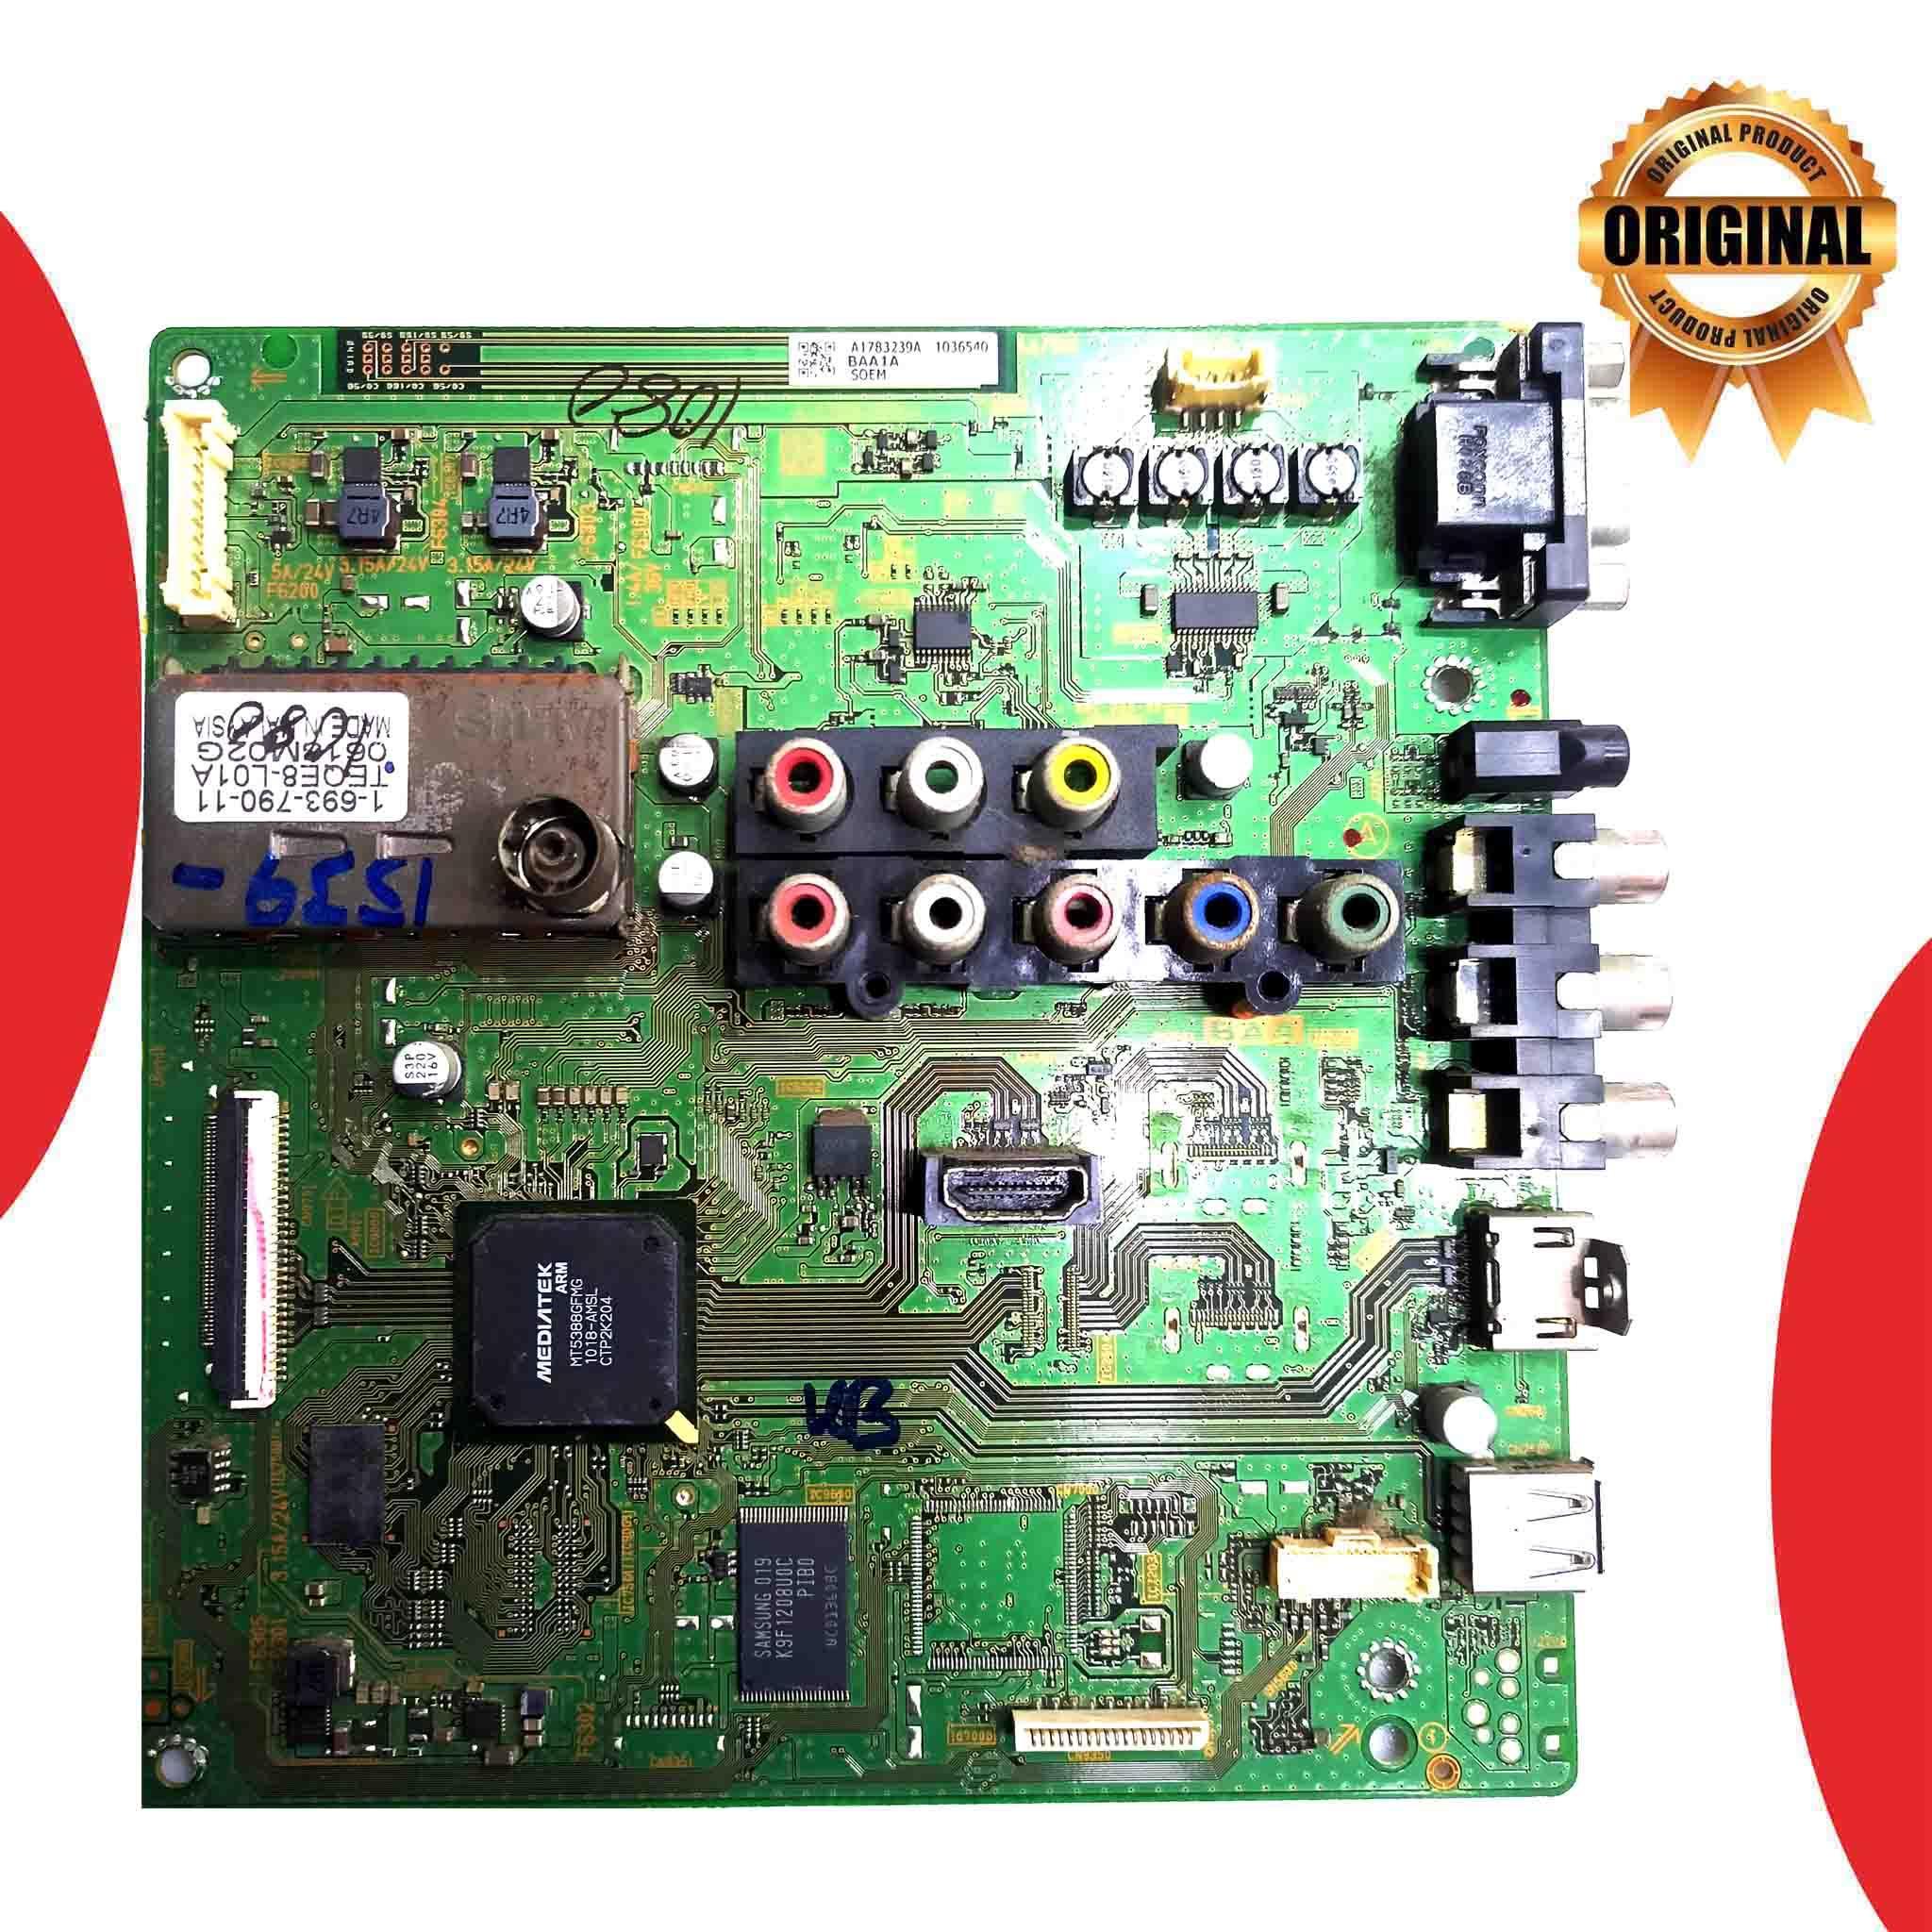 Model 22BX300 Sony LCD TV Motherboard - Great Bharat Electronics